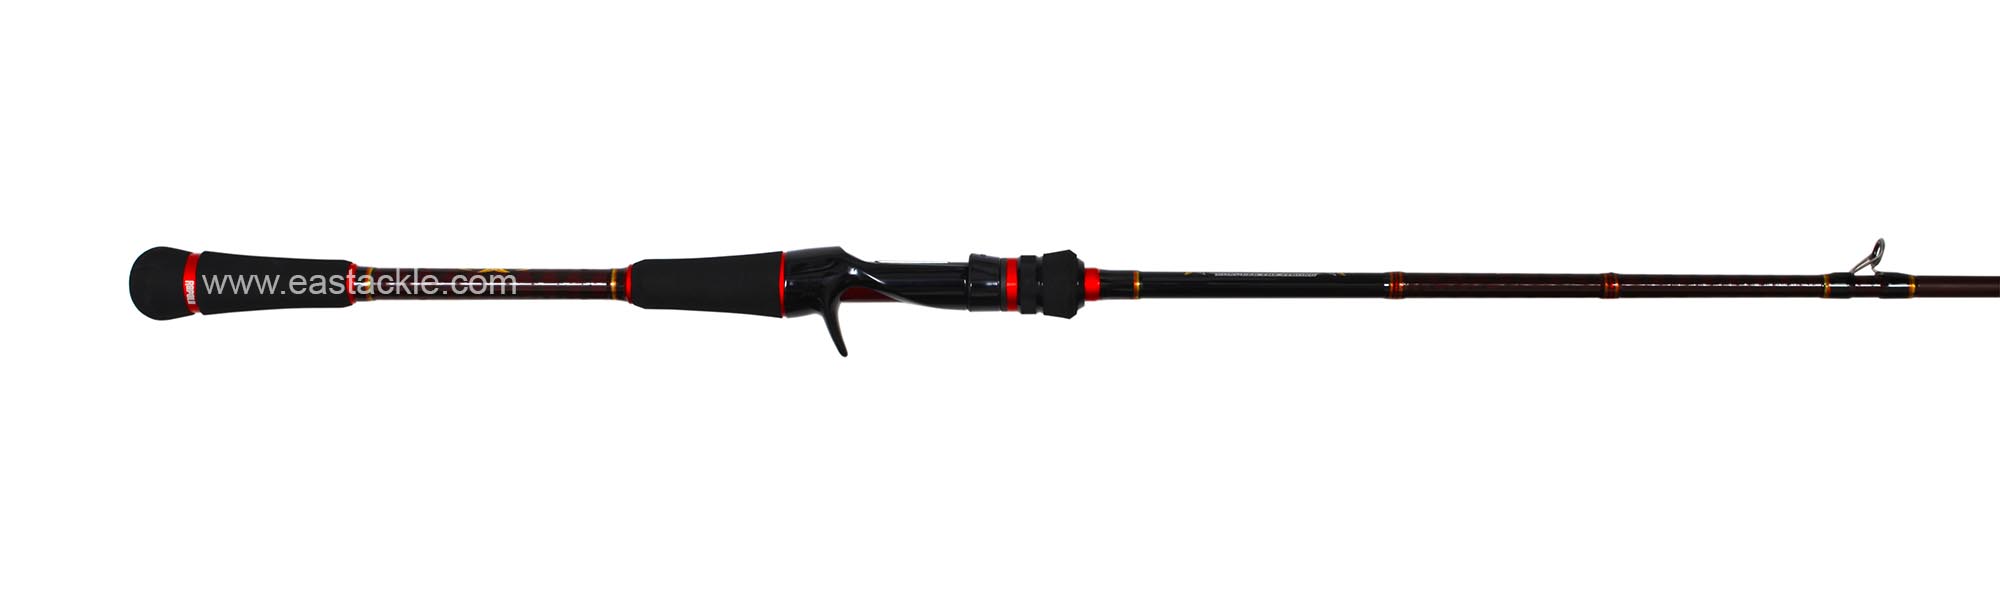 Rapala - 2018 Rapalero - RRC701H - Bait Casting Rod - Butt to Stripper Guide (Side View) | Eastackle